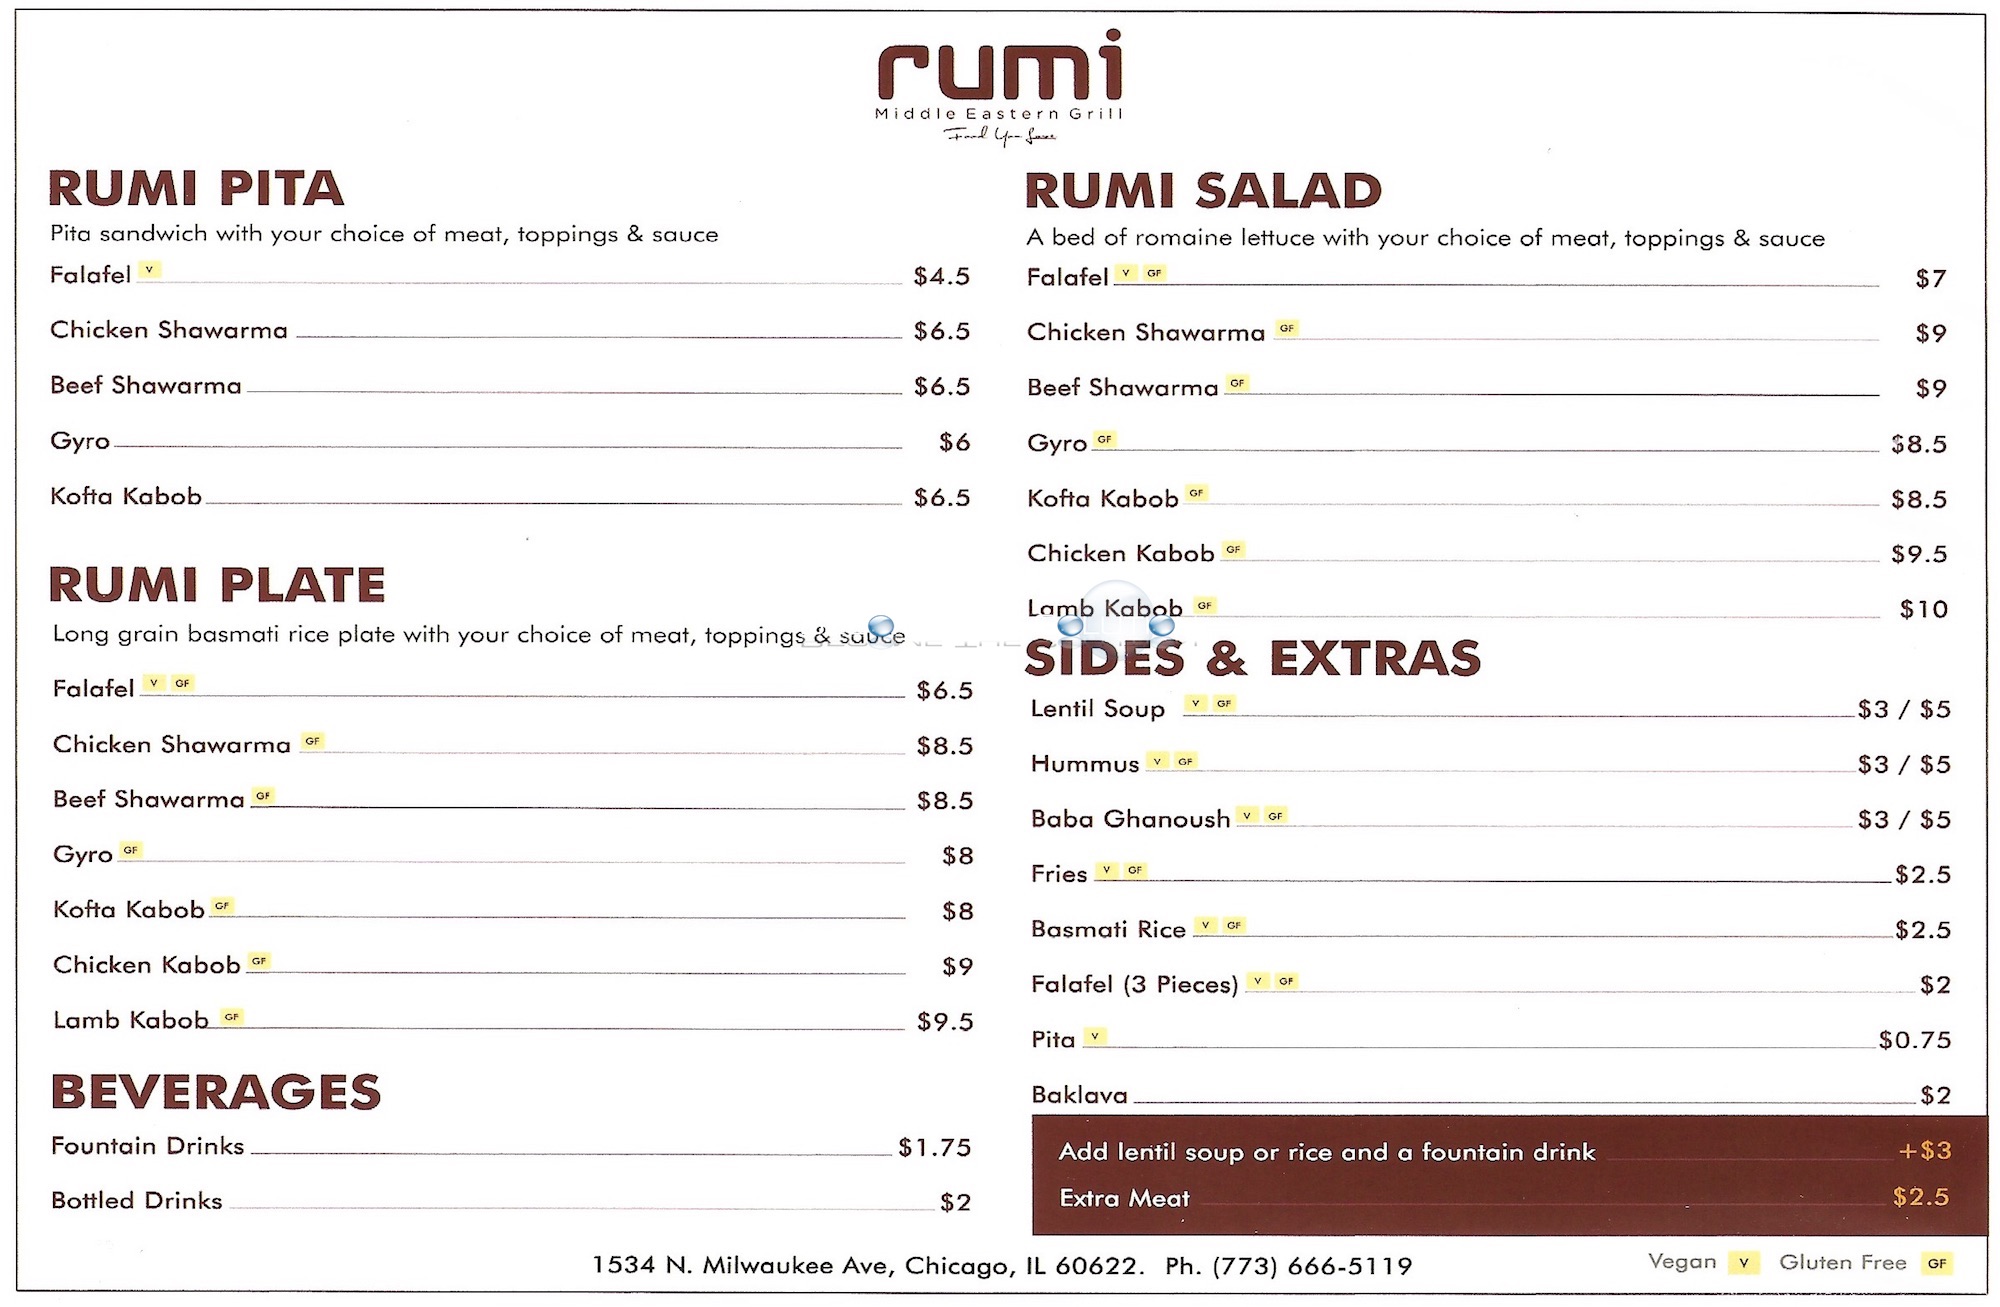 Rumi middle eastern grill Chicago Menu 1